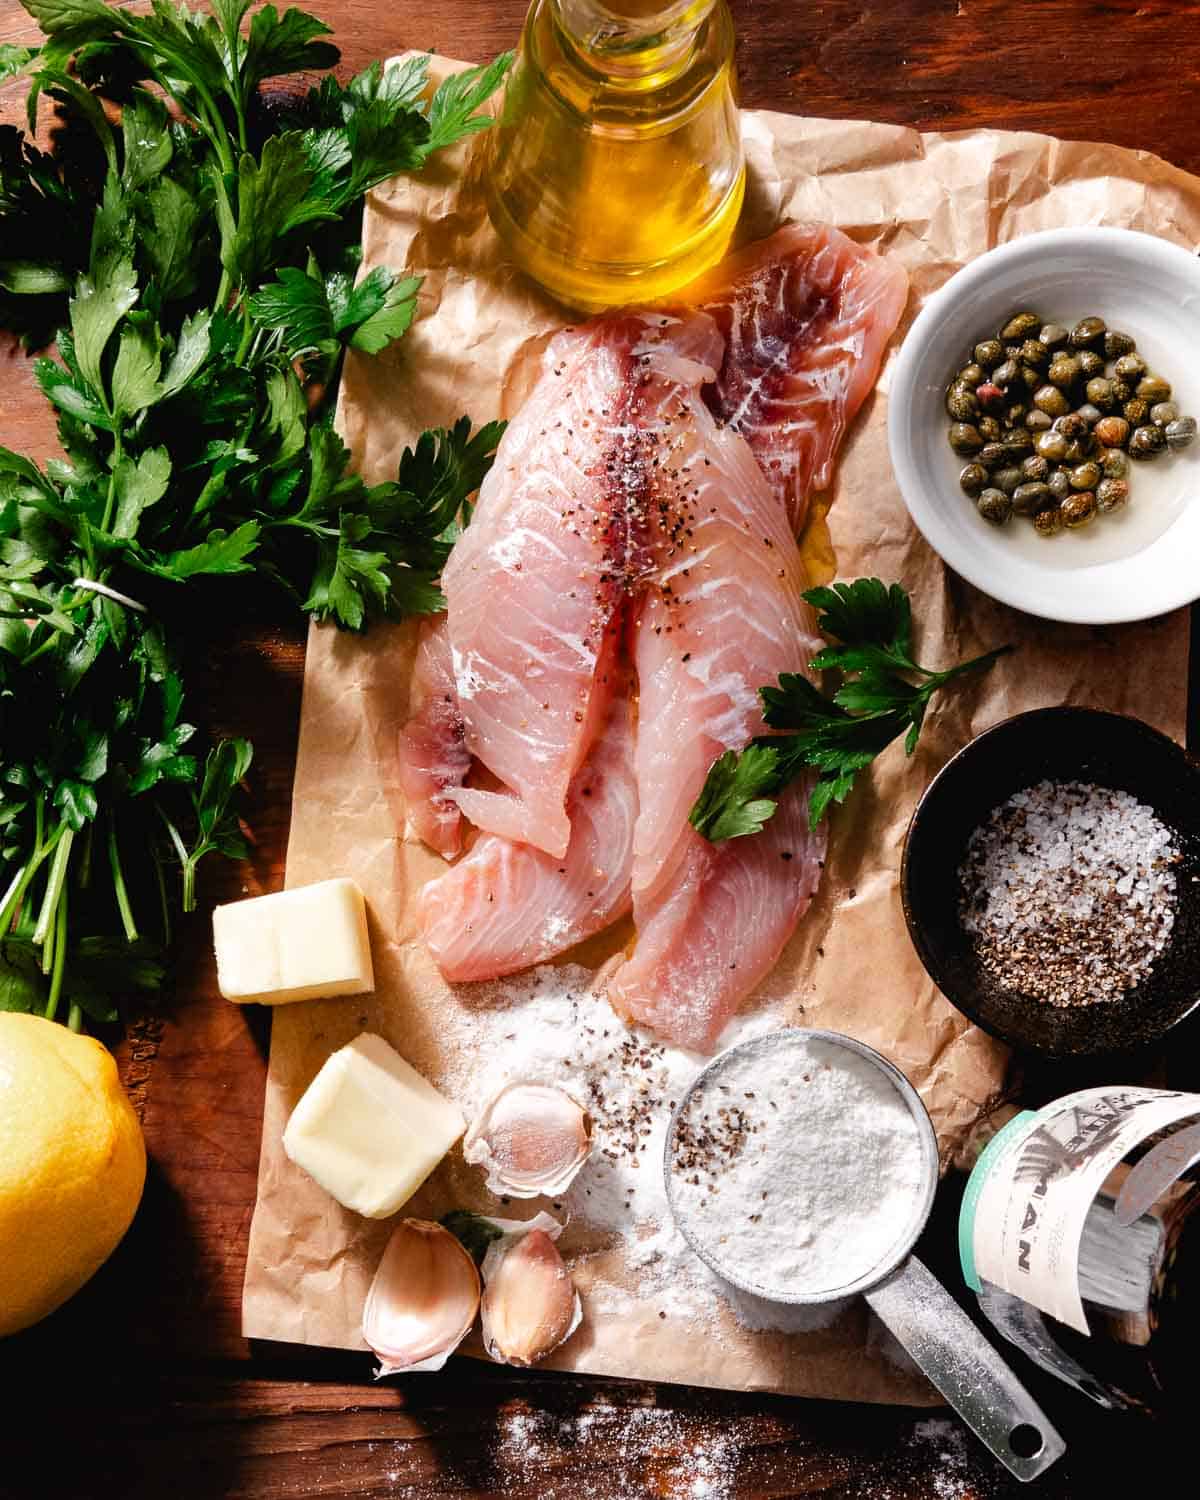 Ingredients for fish picatta including fresh yellowtail, garlic, butter, capers, and lemon.